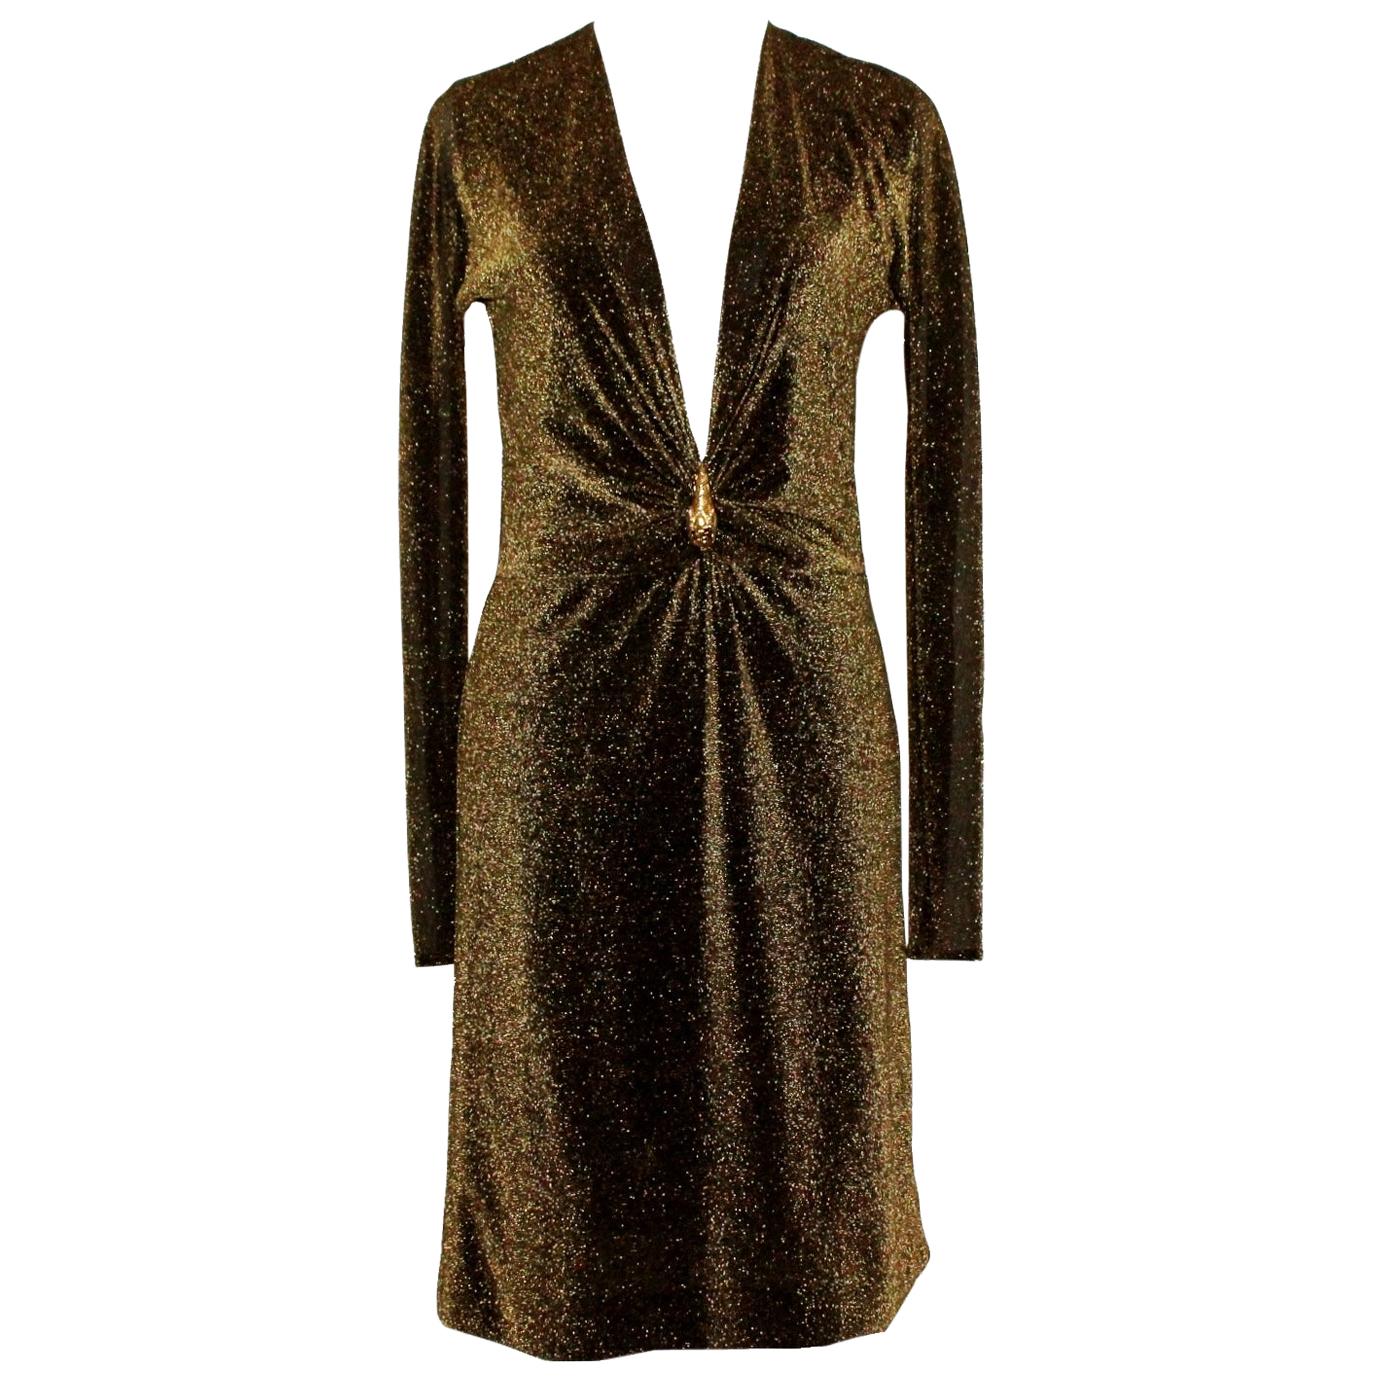 UNWORN Gucci By Tom Ford 2000 Metallic Deep Plunging Evening Dress 42 For Sale